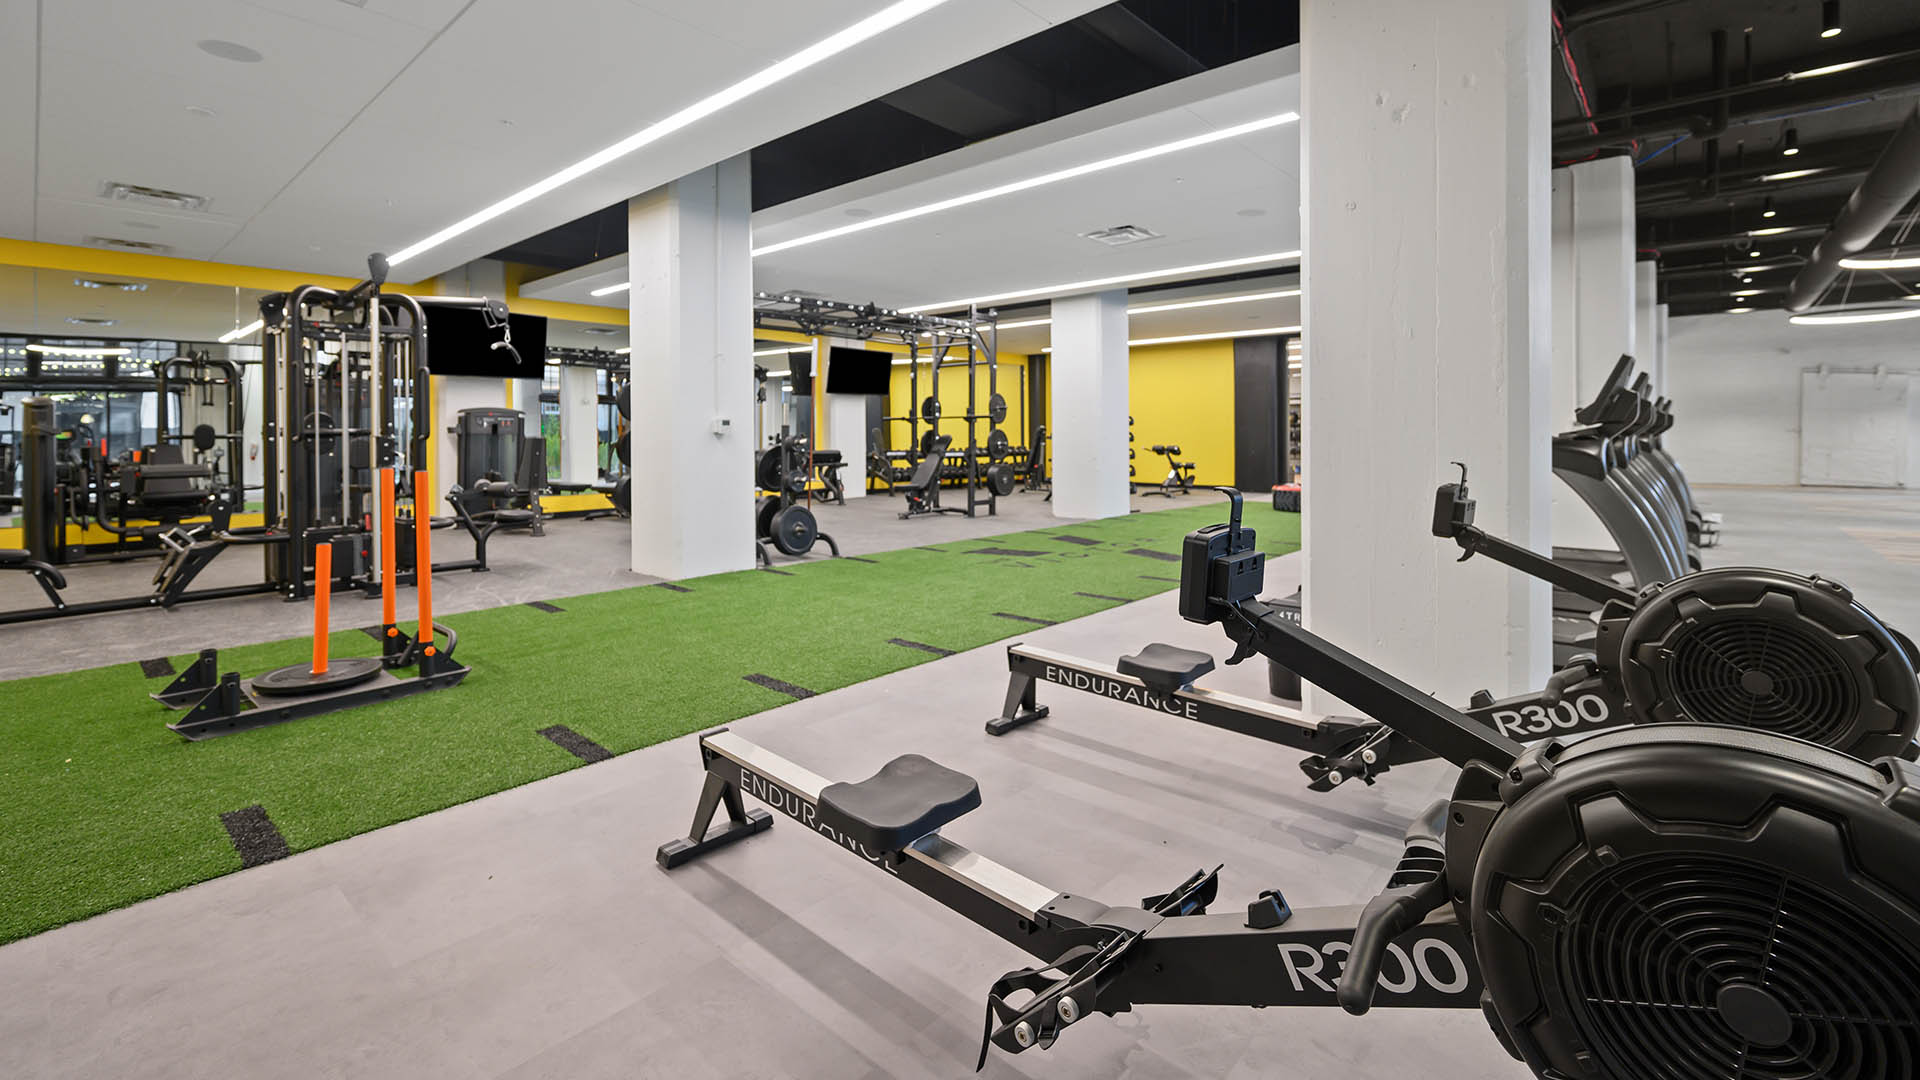 Fitness center with artificial turf and rowing machines.